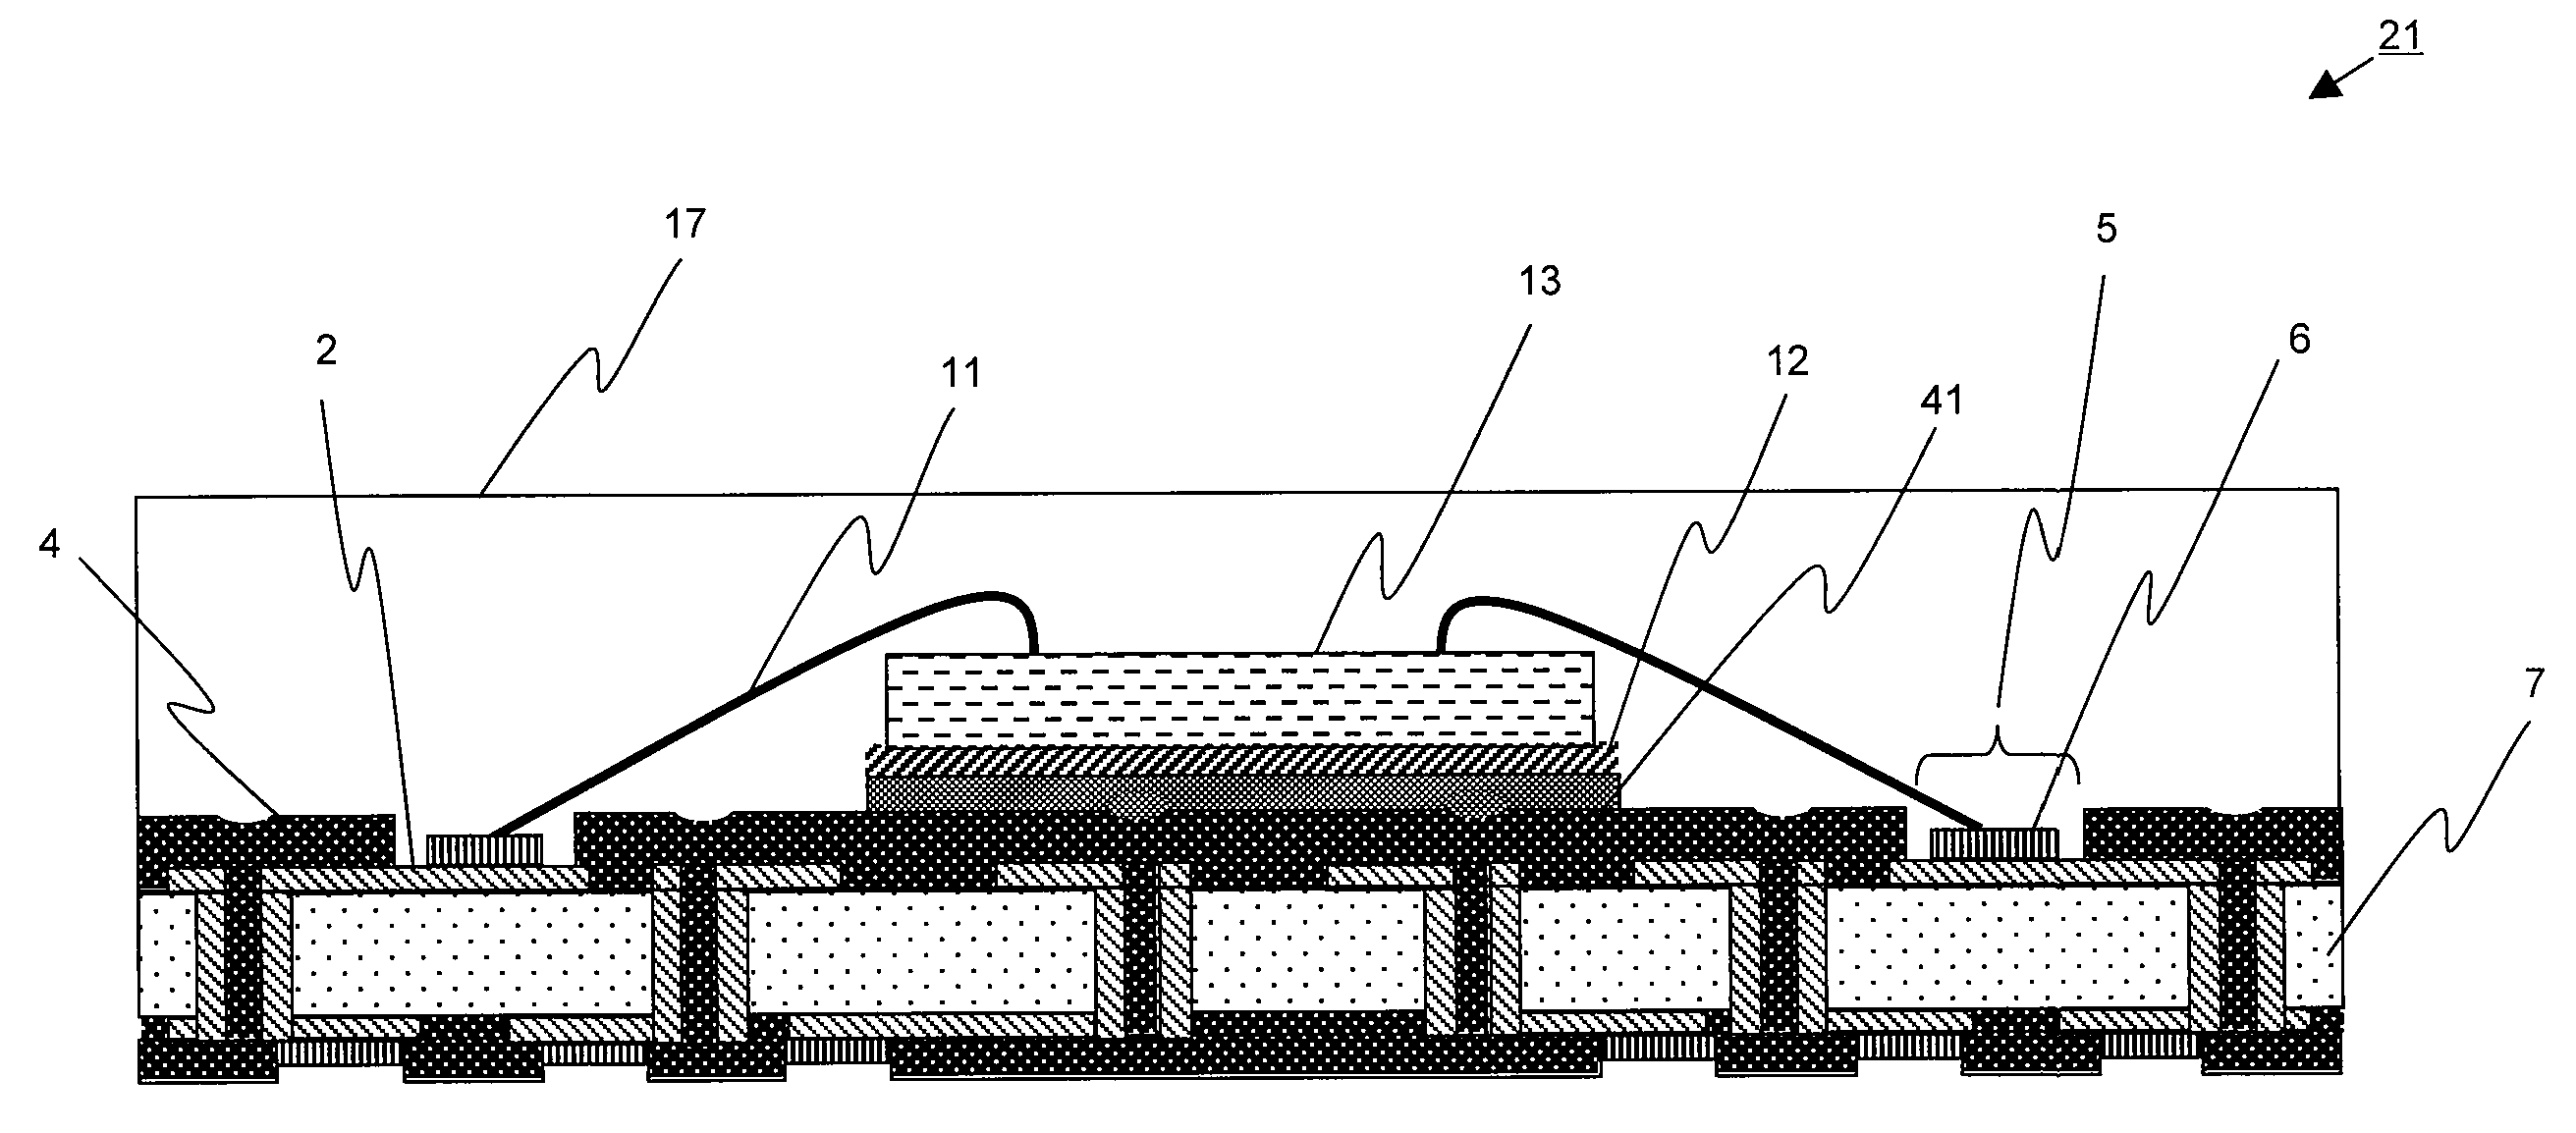 Wiring substrate for use in semiconductor apparatus, method for fabricating the same, and semiconductor apparatus using the same